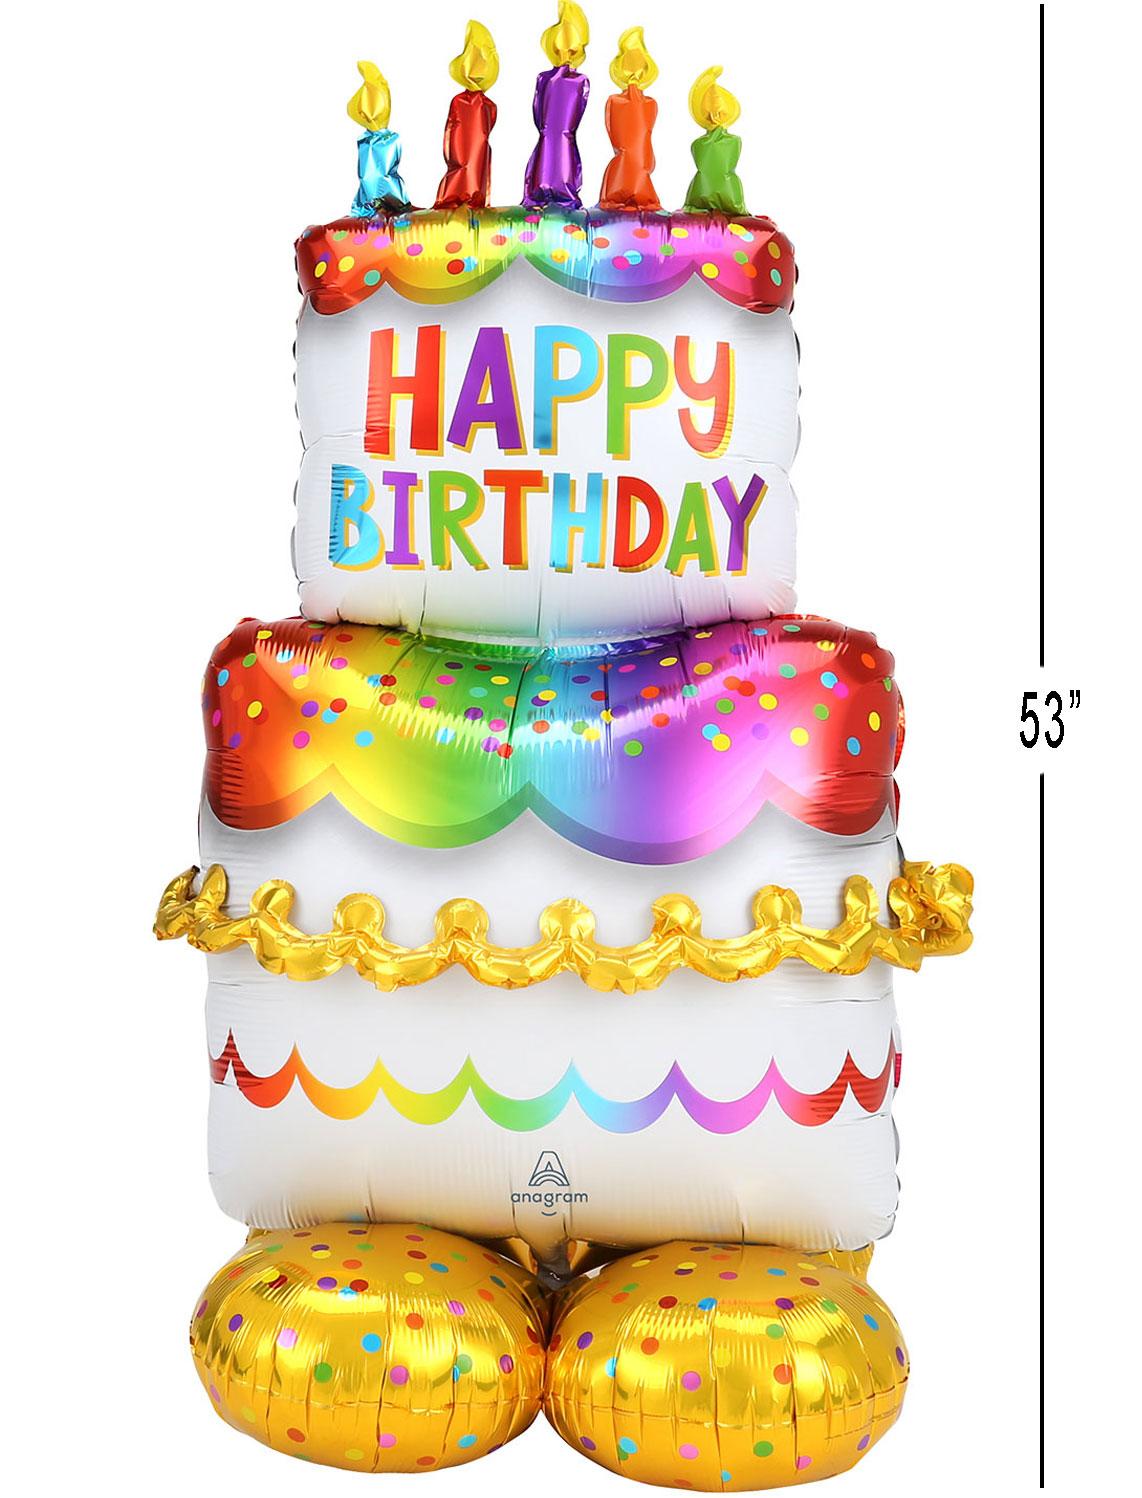 AirLoonz: Birthday Cake Air-Fill Character Balloon by Amscan 4244911 available here at Karnival Costumes online party shop